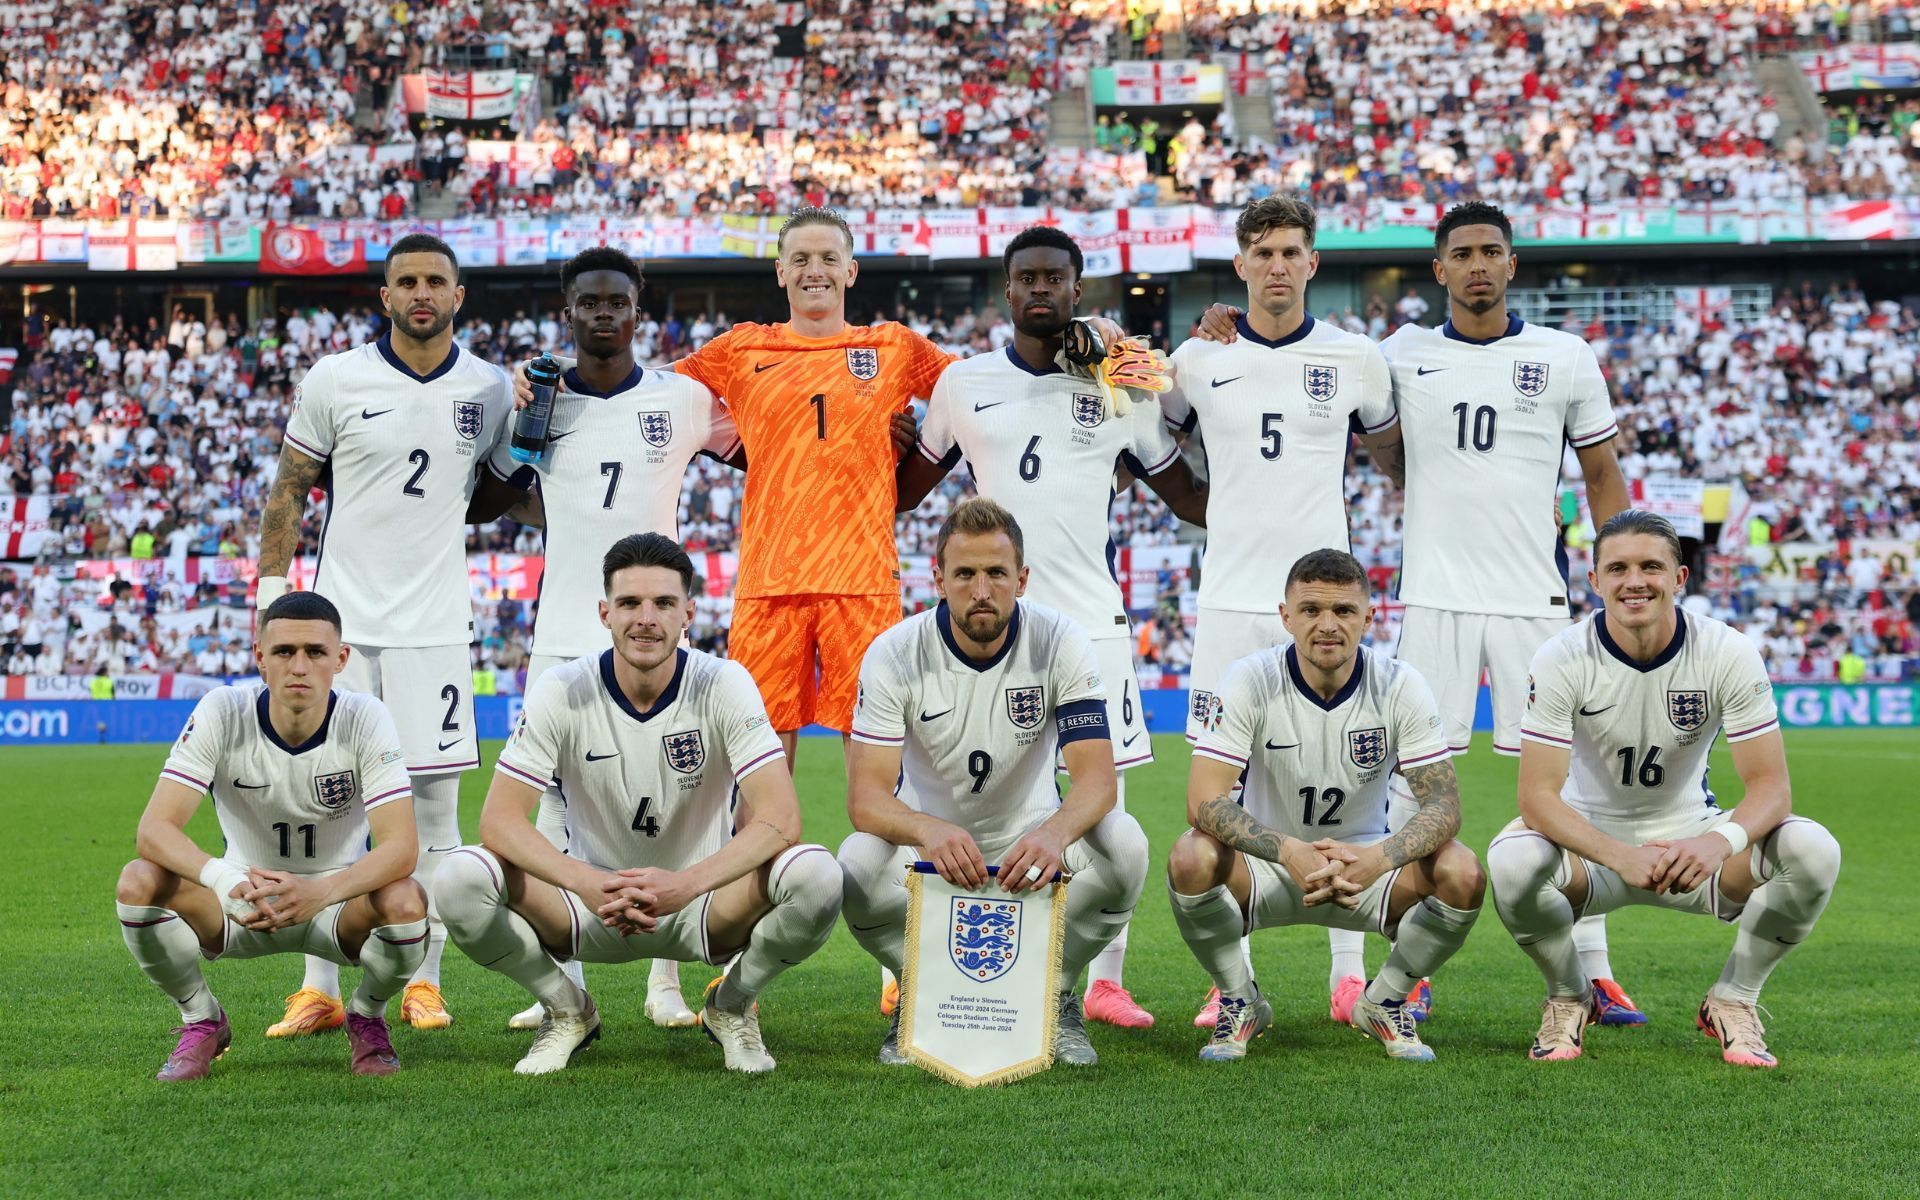 Can England find their best form against Slovakia in their game this weekend?